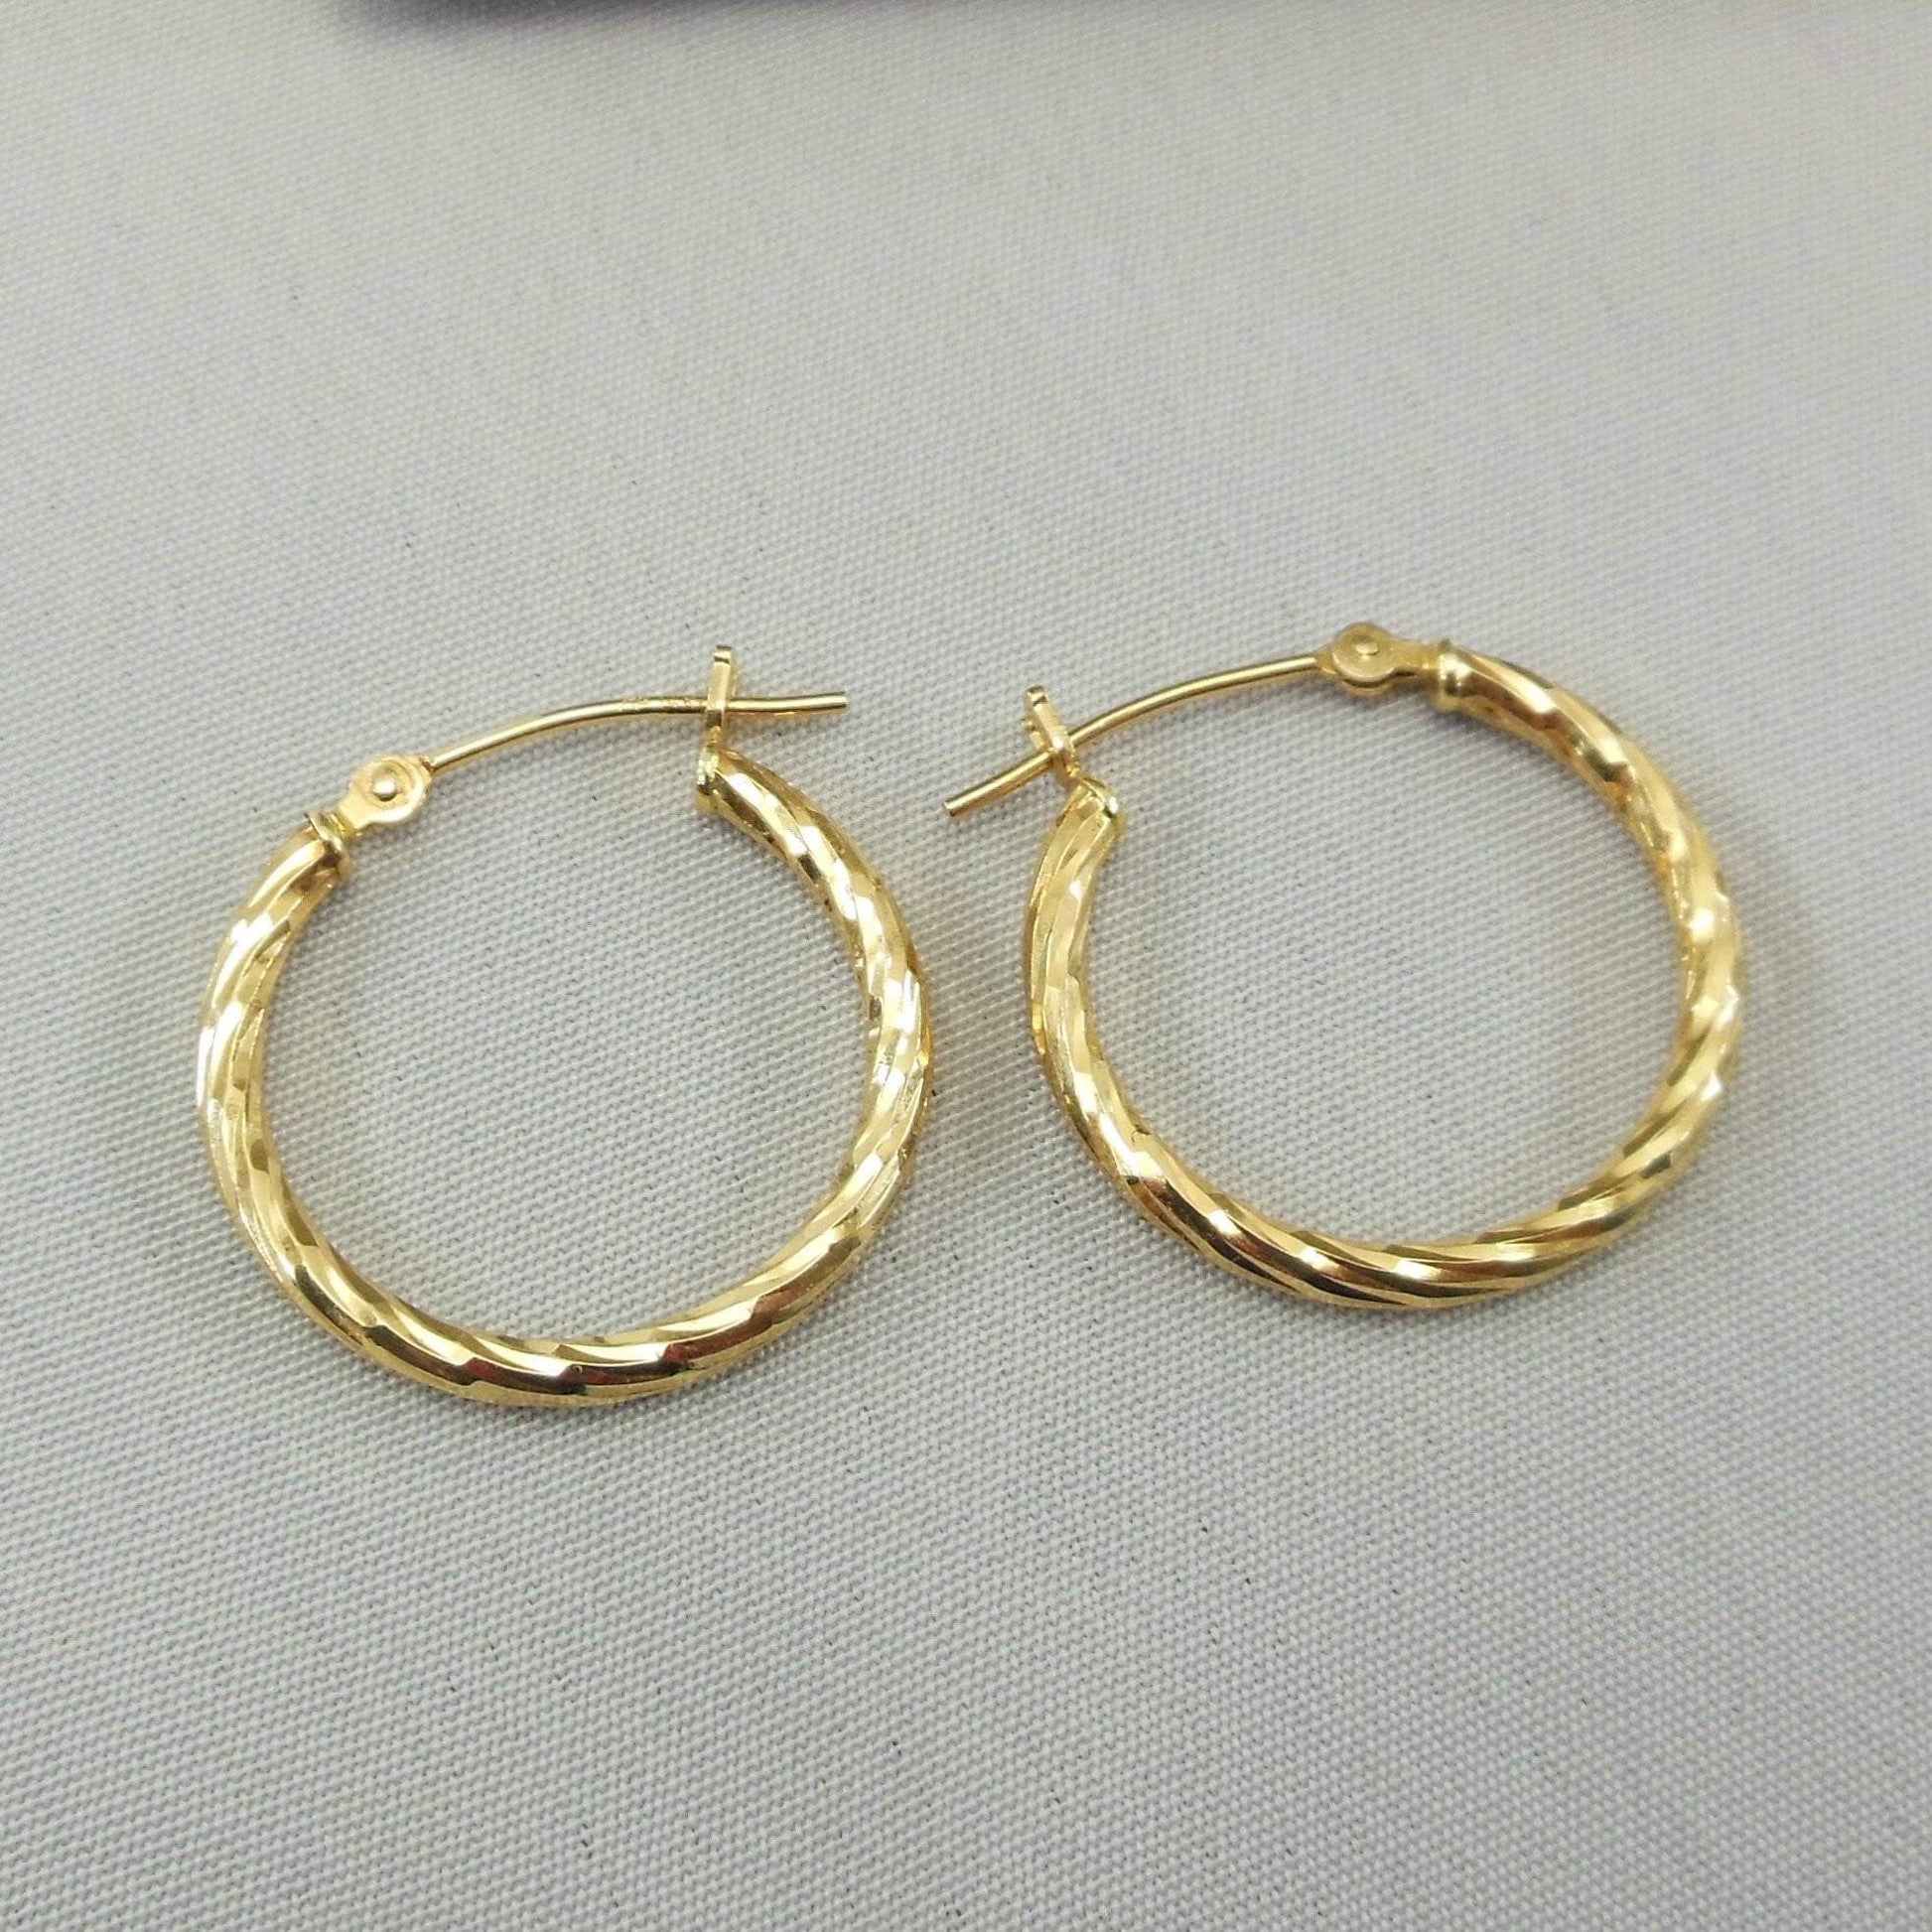 Michael  Anthony NY Pair Estate 14K Yellow Gold Hoop Earrings 20 mm 1 Gram Textured